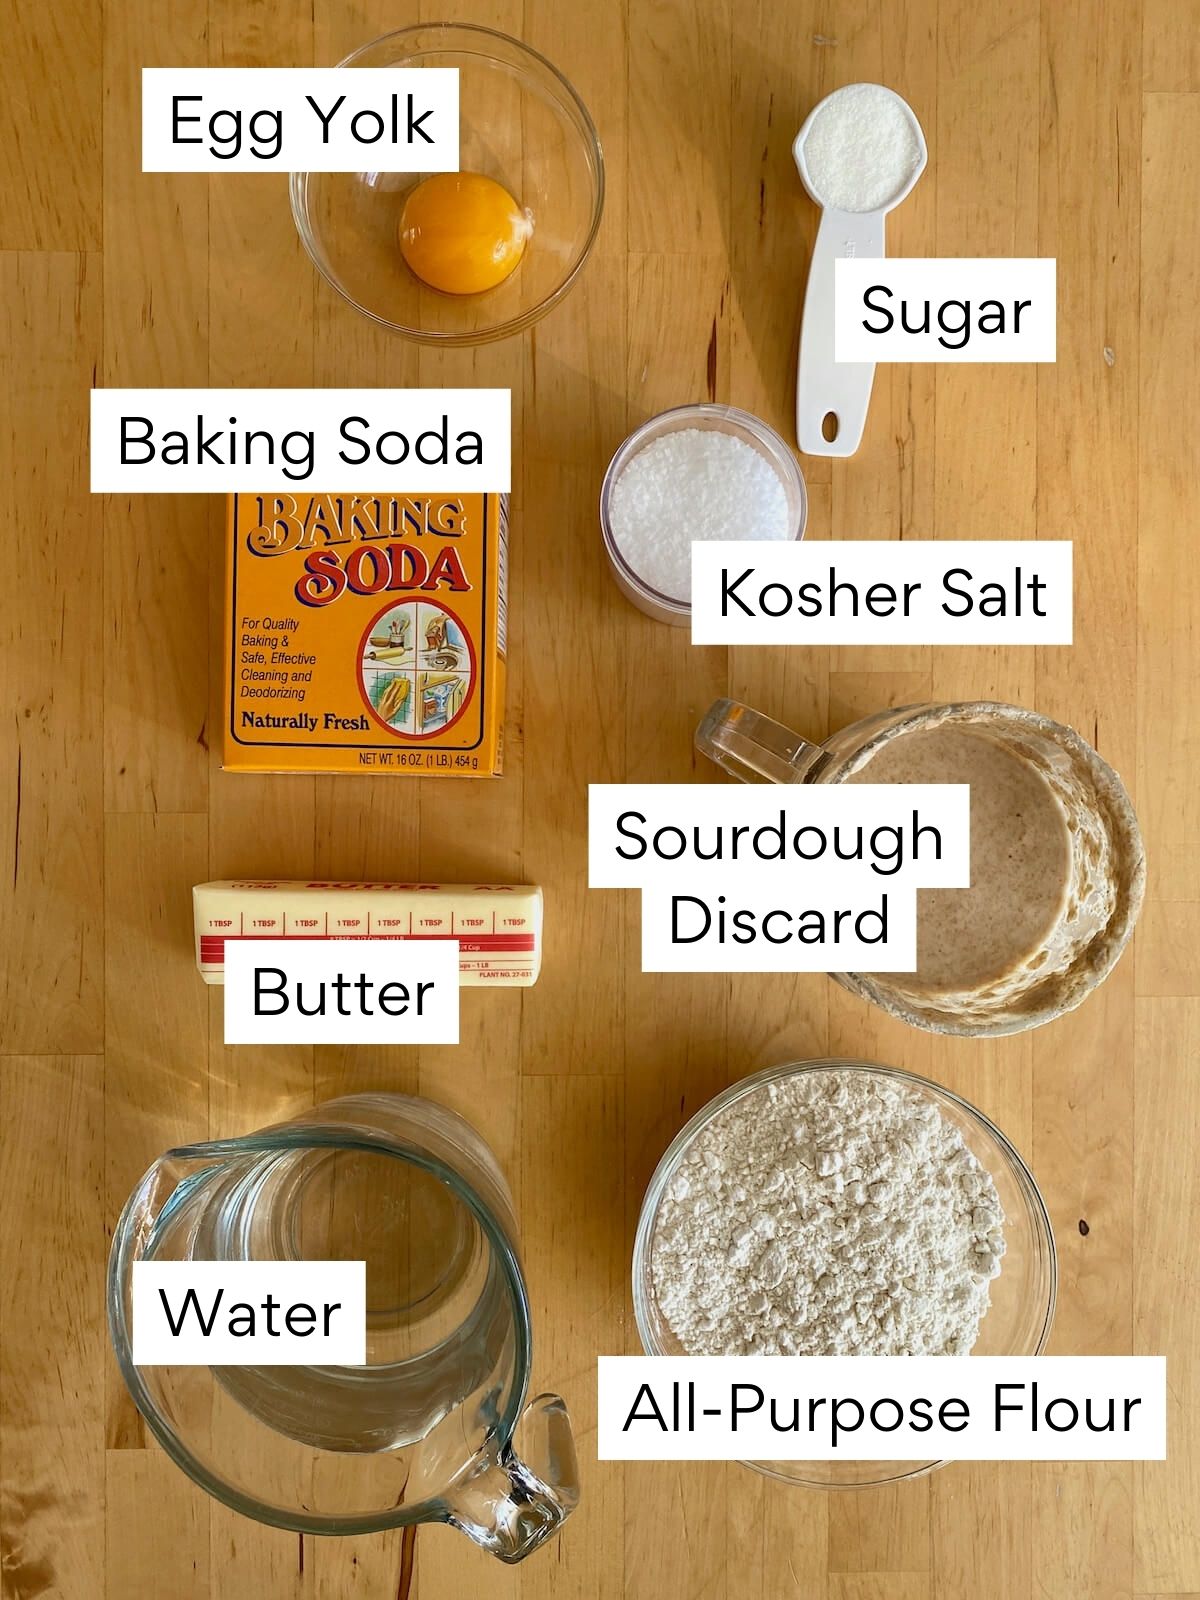 The ingredients to make sourdough discard soft pretzels. Each ingredient is labeled with text. They include egg yolk, sugar, baking soda, kosher salt, butter, sourdough discard, water, and all-purpose flour.